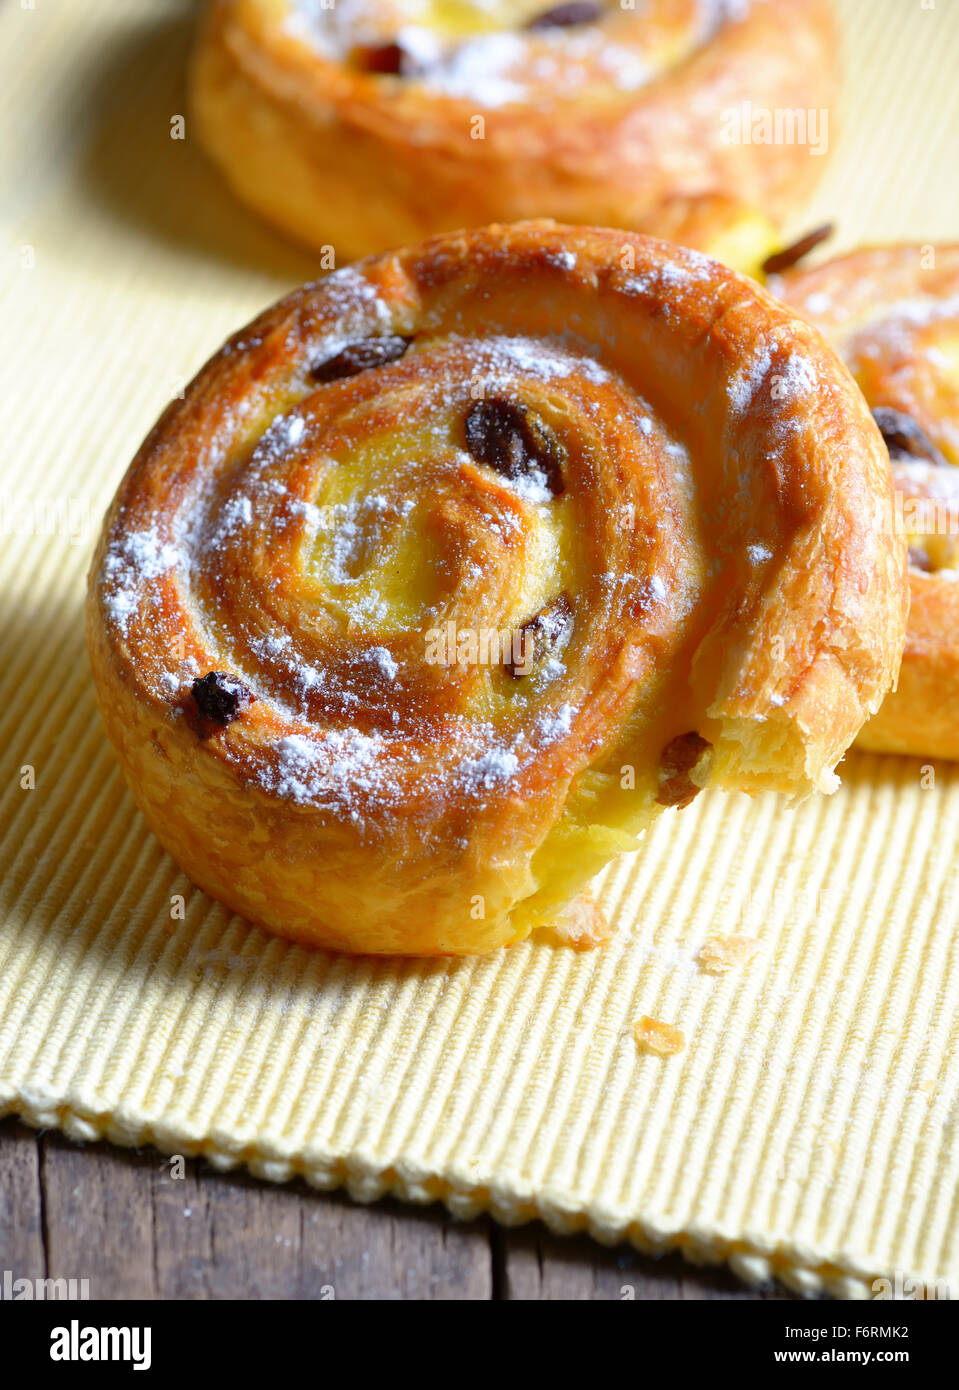 Pastry swirls with raisins on old wood Stock Photo